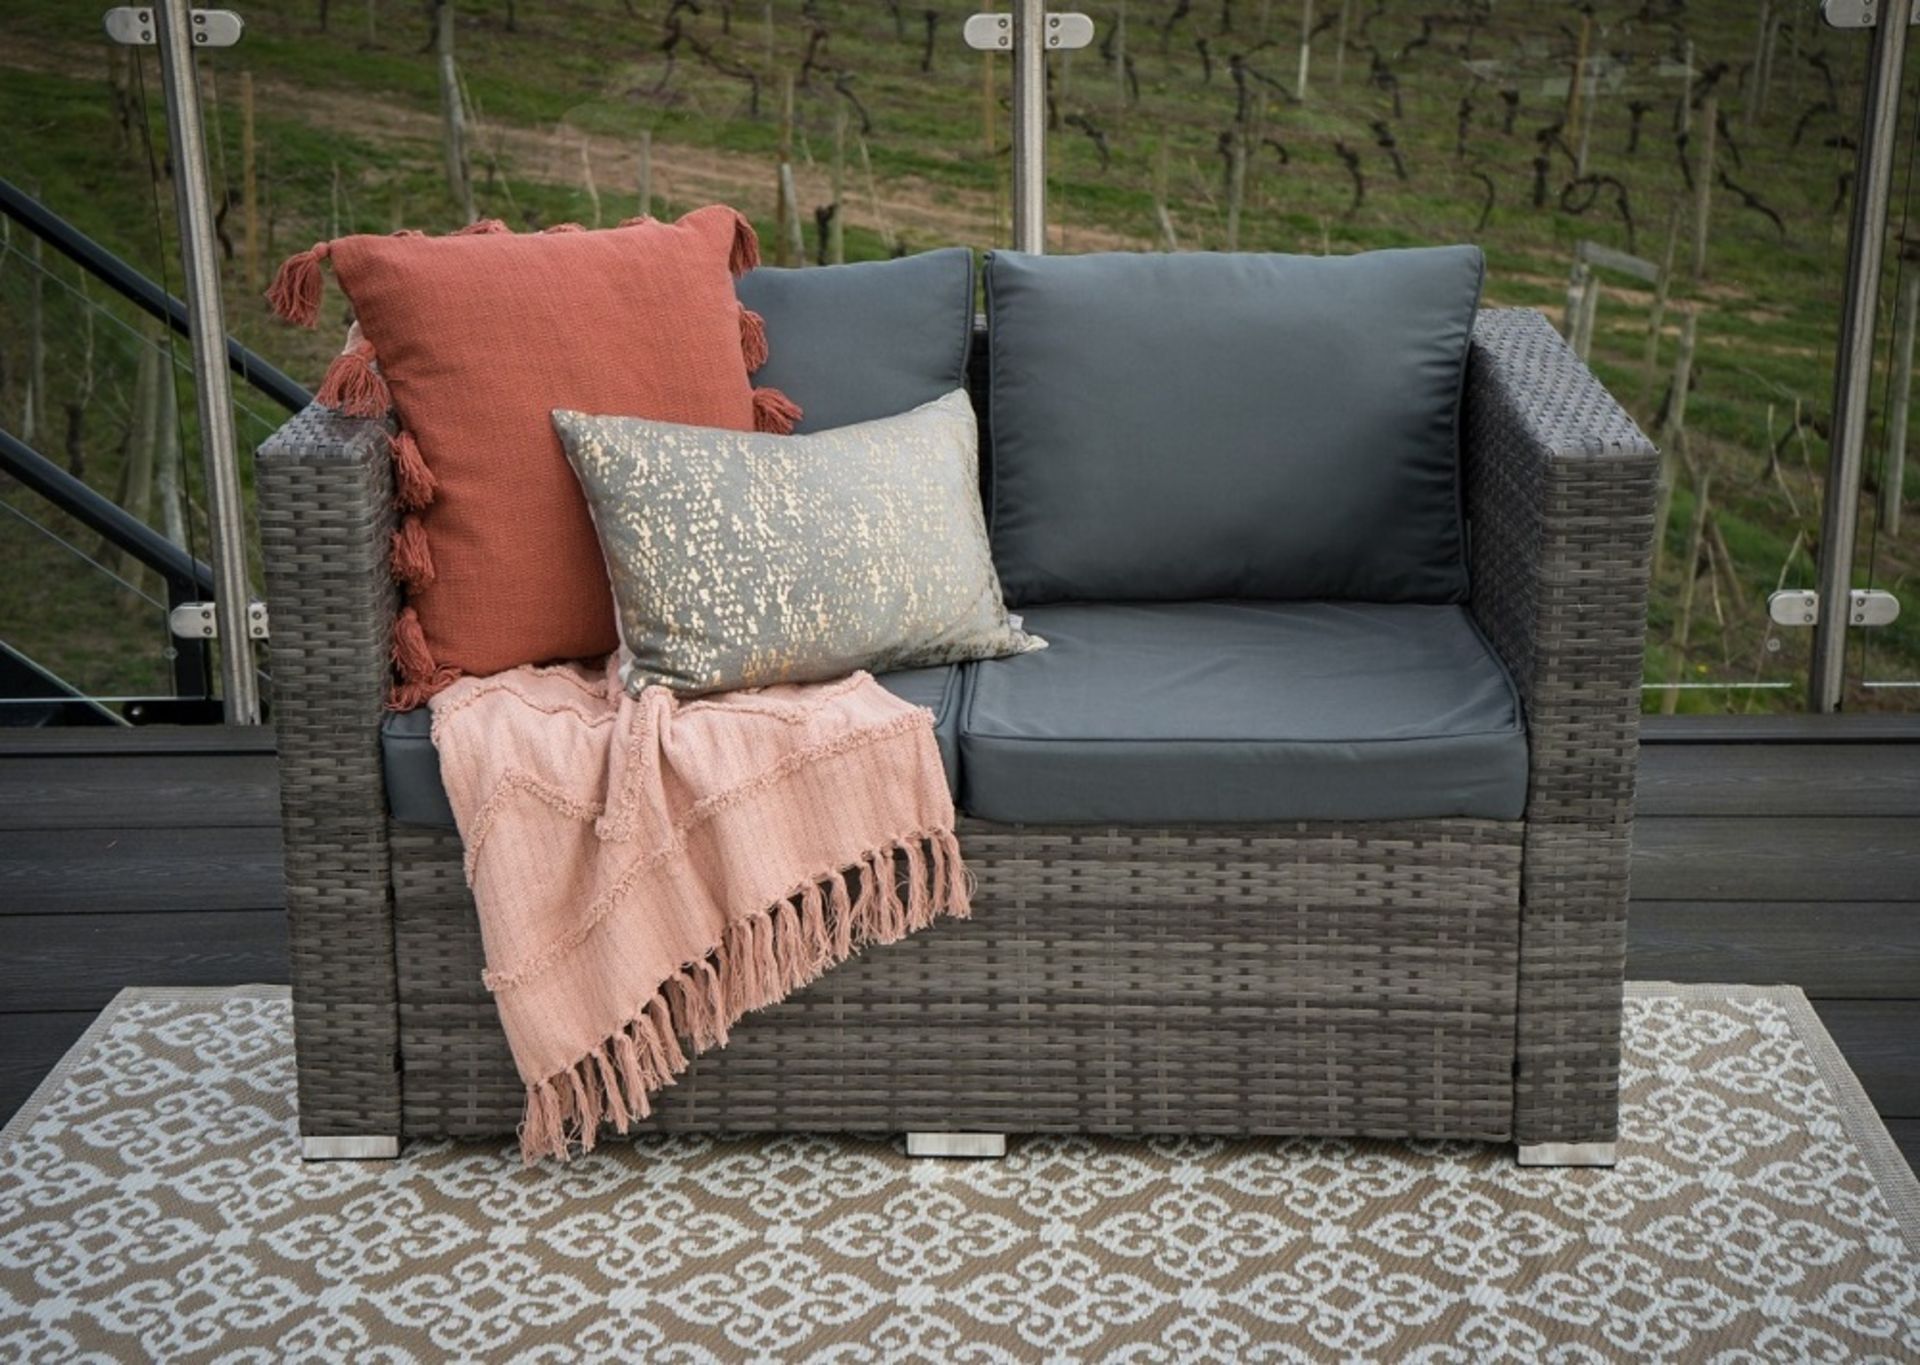 BRAND NEW Large 8 Seater Grey Rattan Furniture Set- RRP £914. Outdoor Patio Garden Furniture - Image 3 of 5